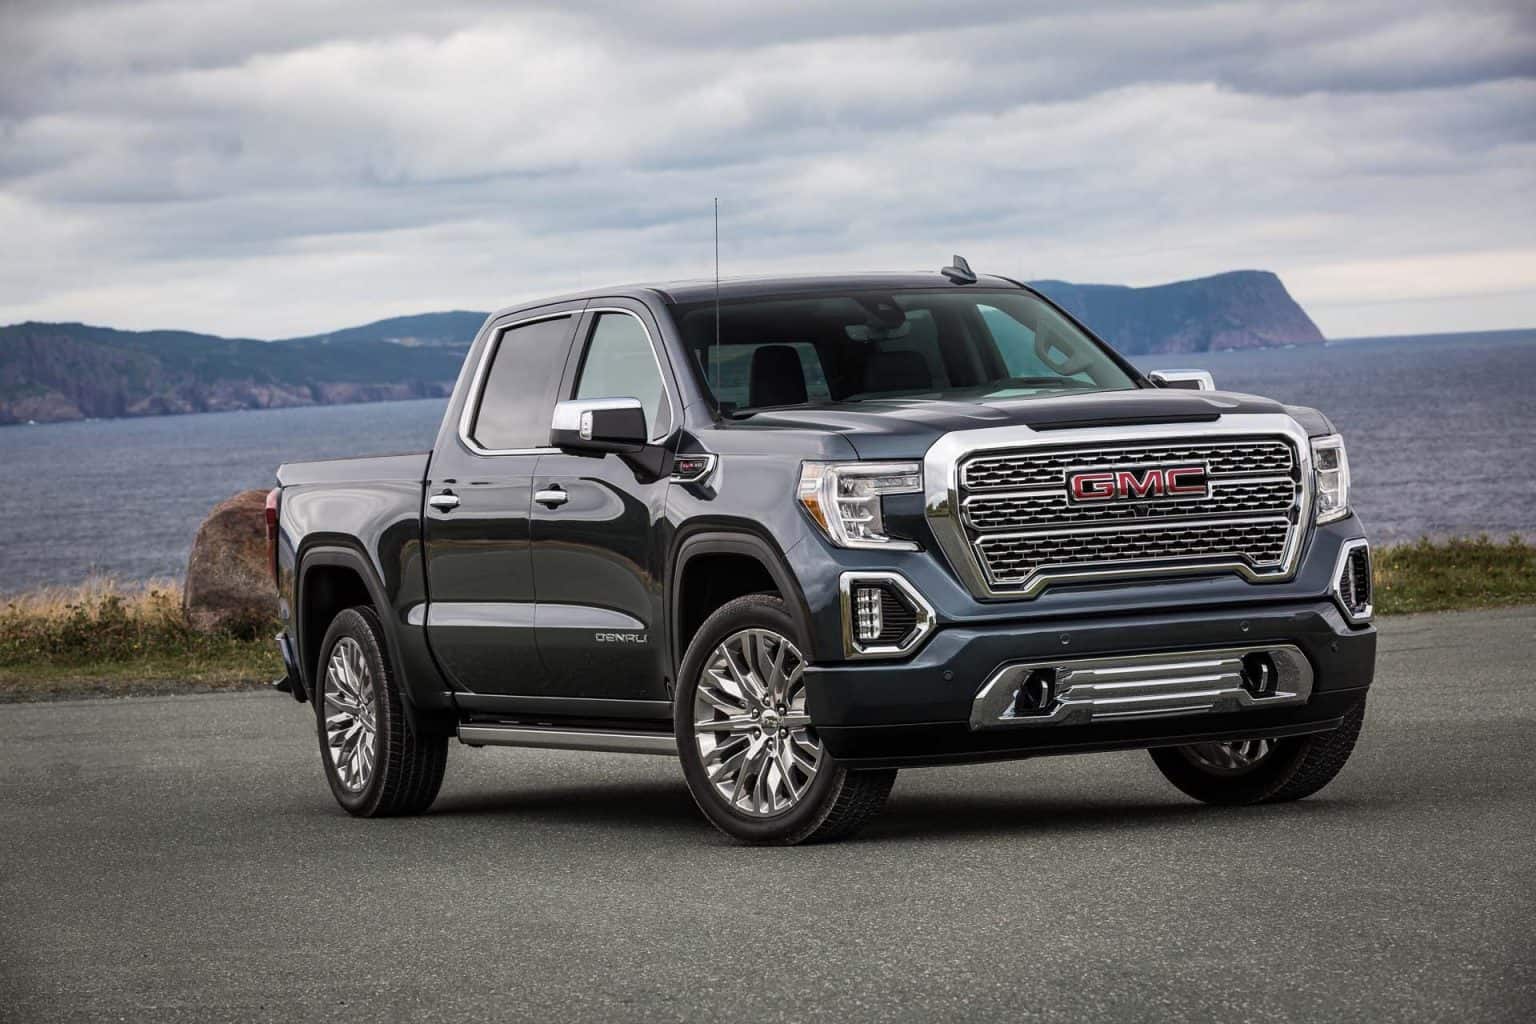 Hybrid Pickup Truck Here Are the Best Hybrids in USA (2021)